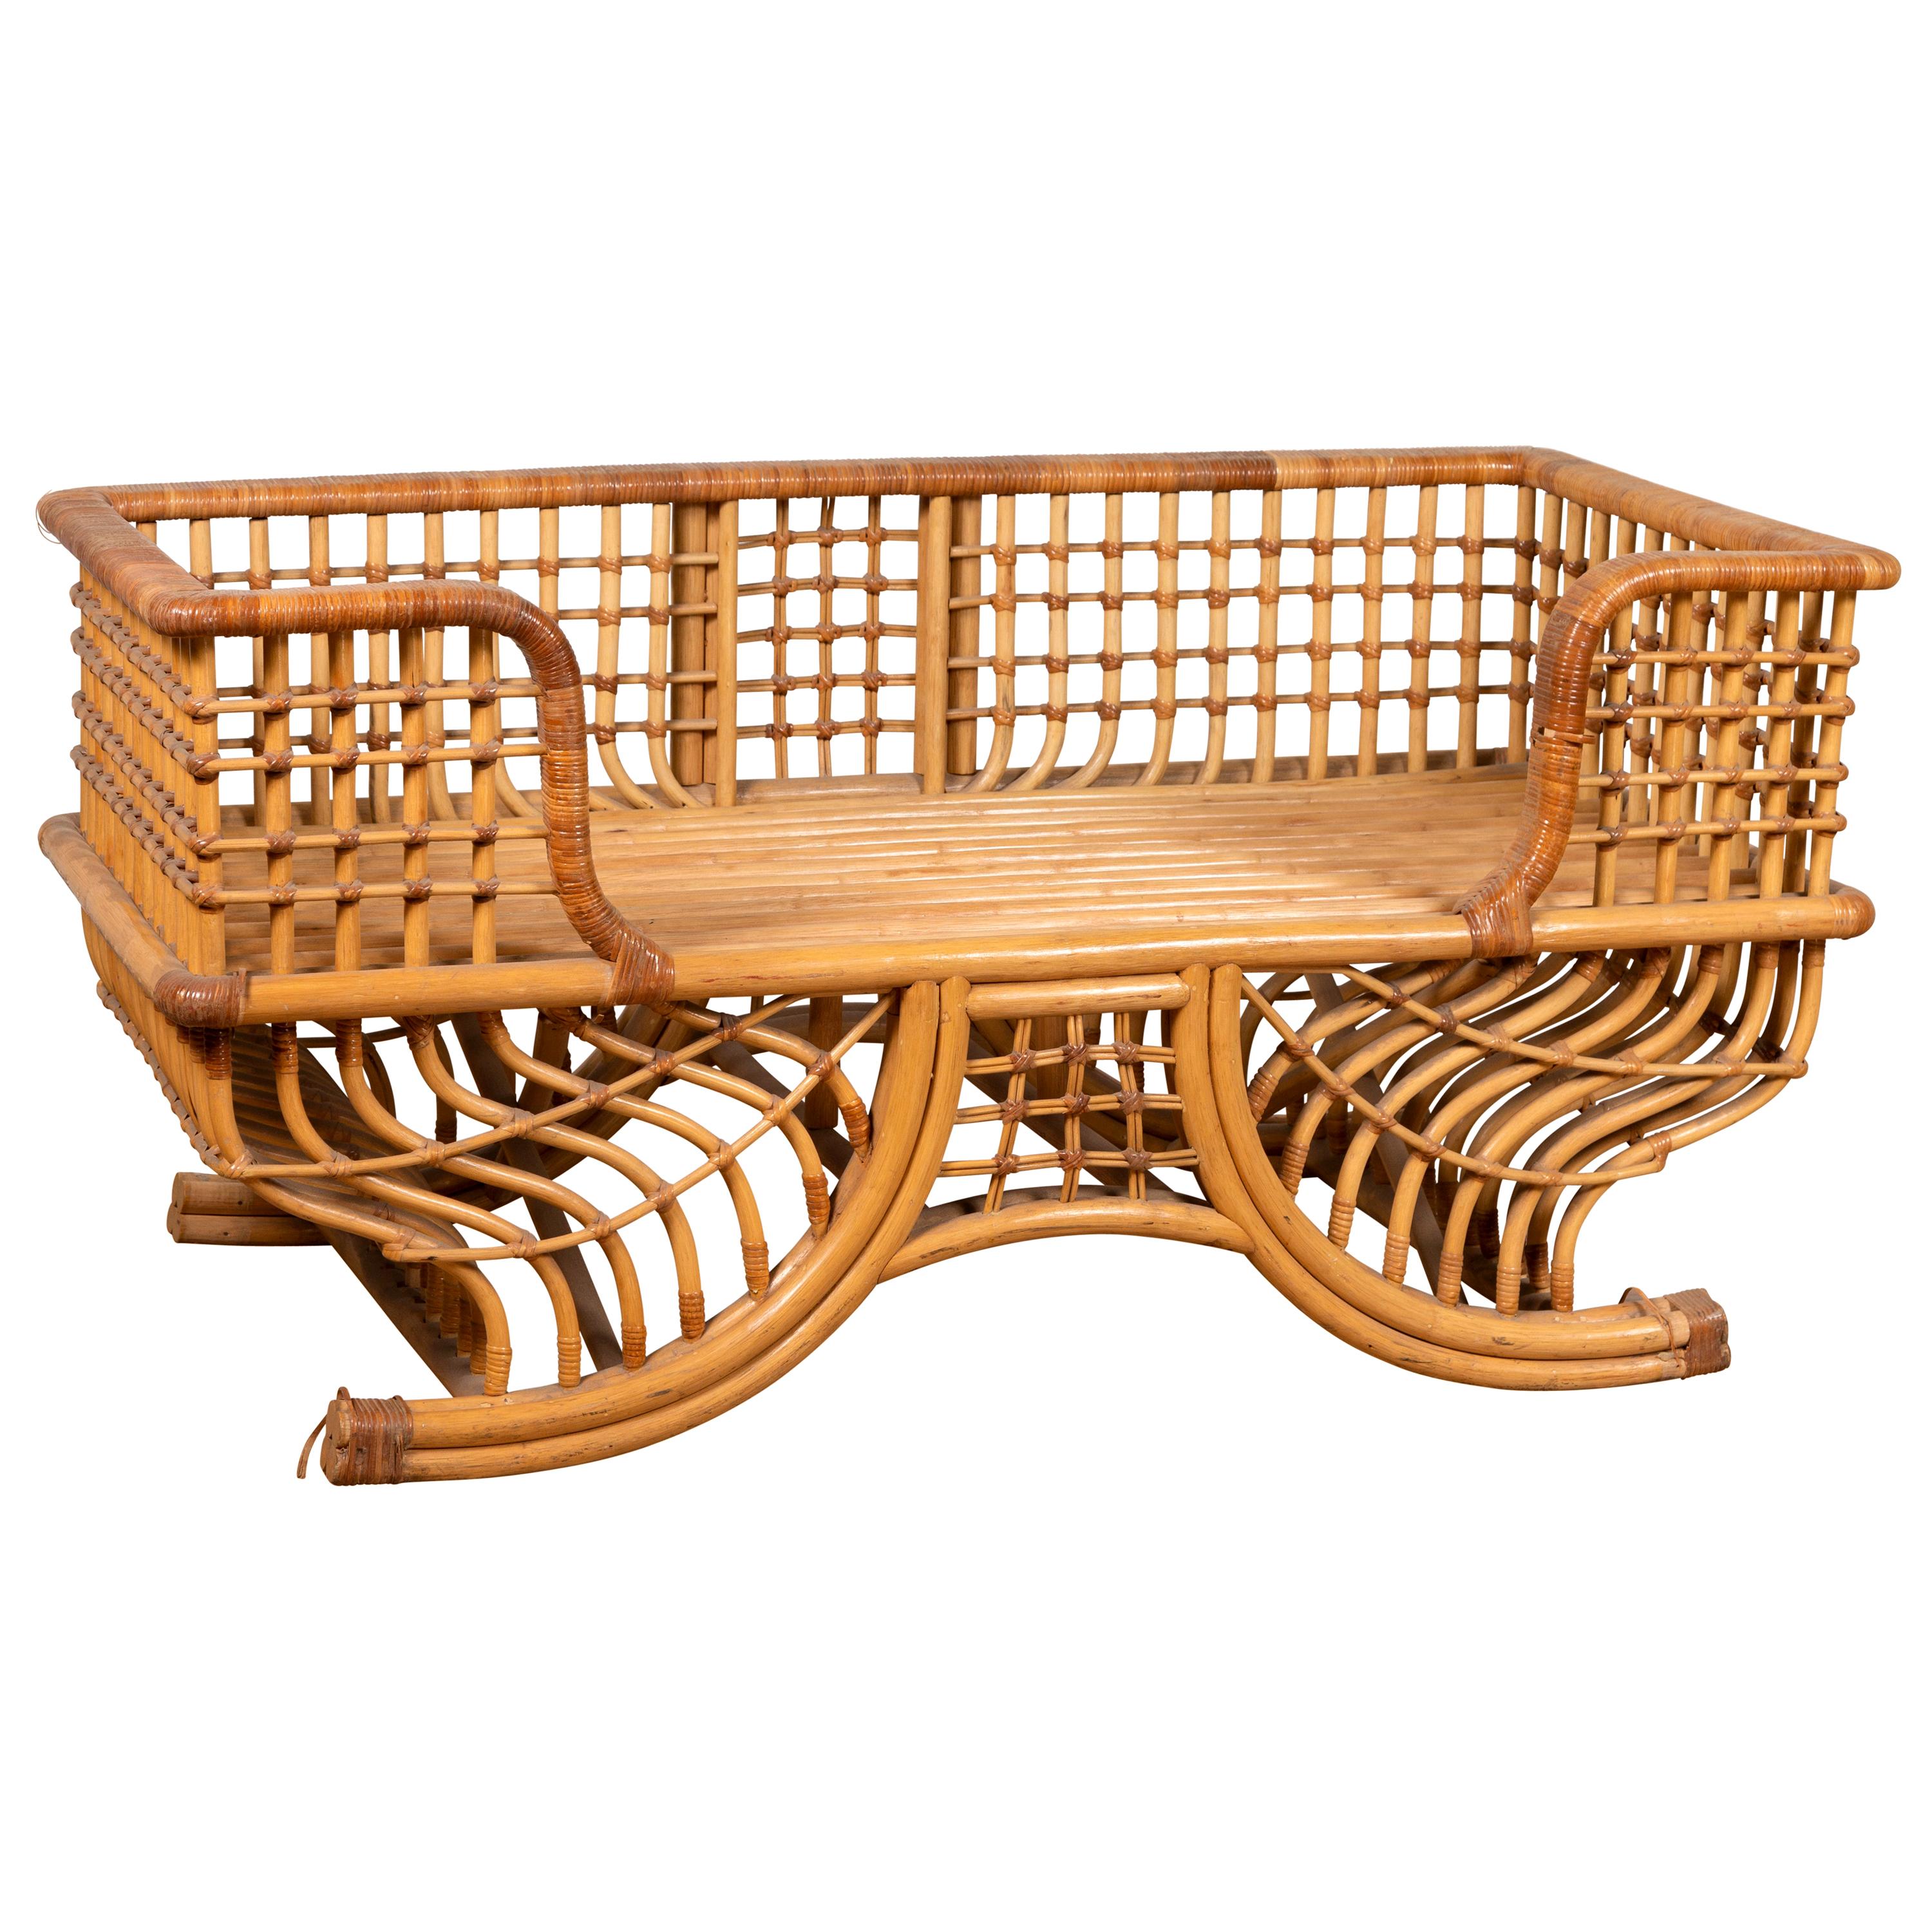 Indian Bamboo Howdah Settee Original Used for Sitting on an Elephant